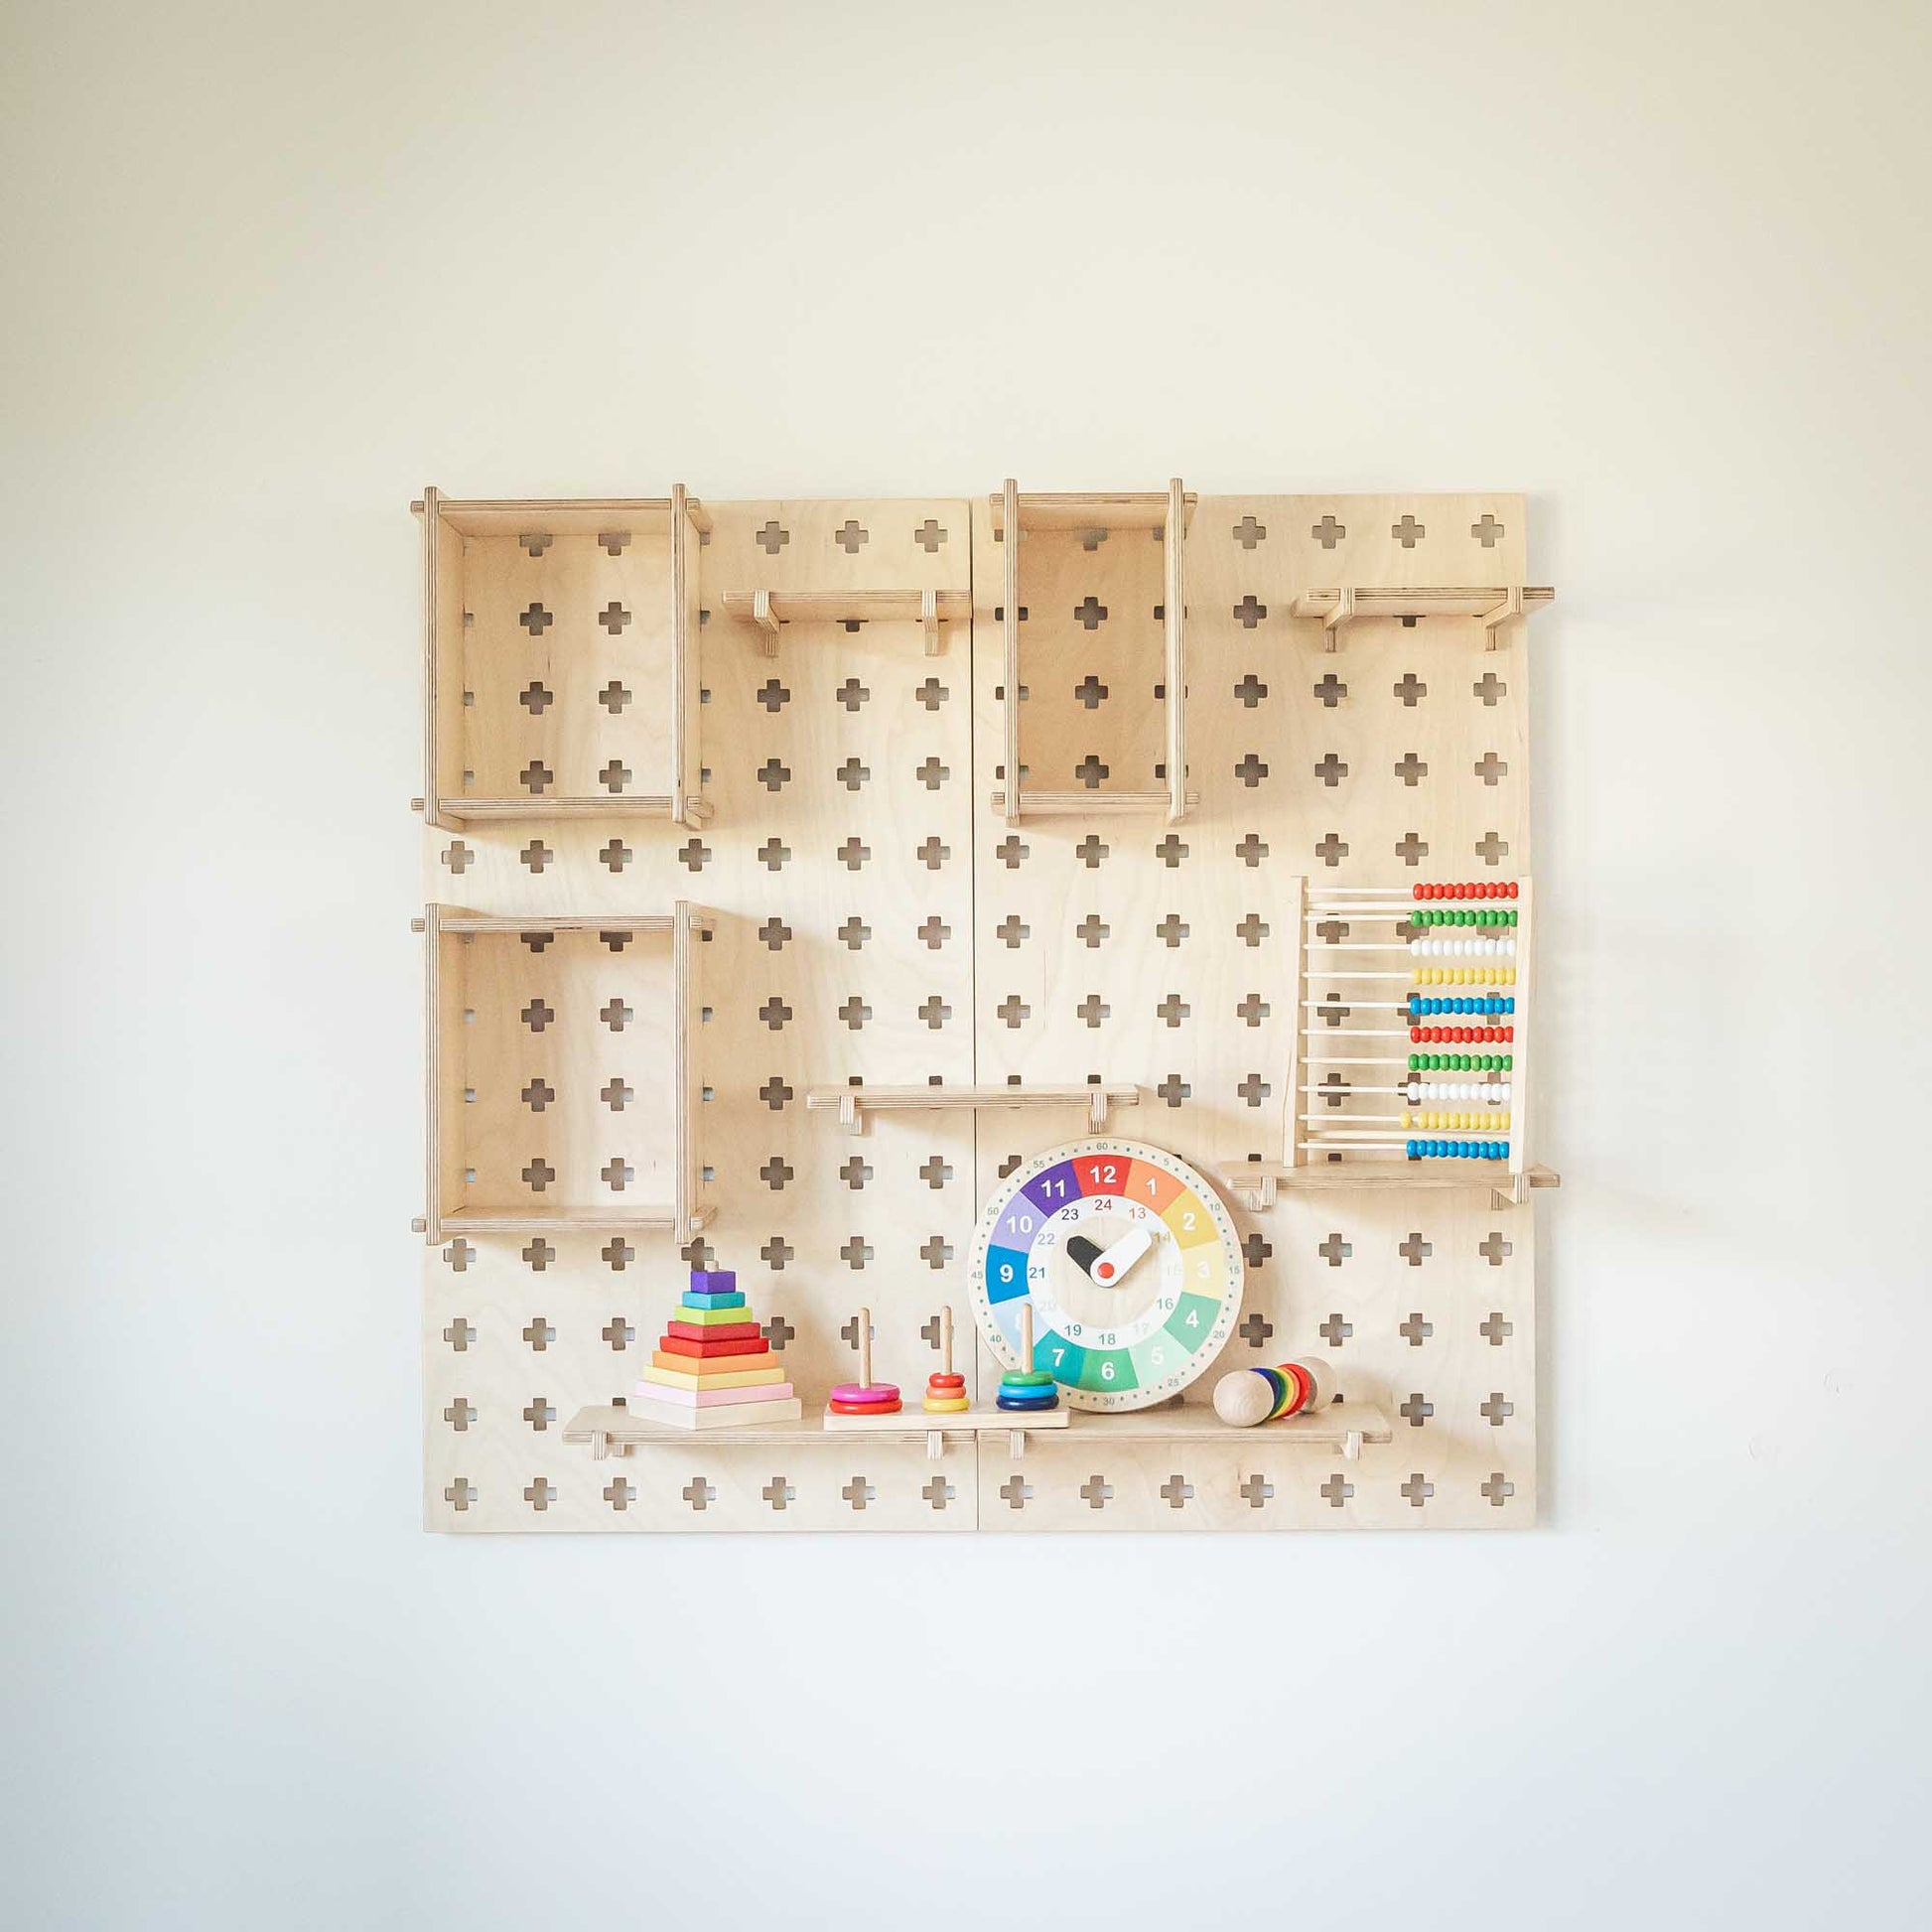 A Large Pegboard Display Stand with Sweet HOME from wood toys hanging on it.